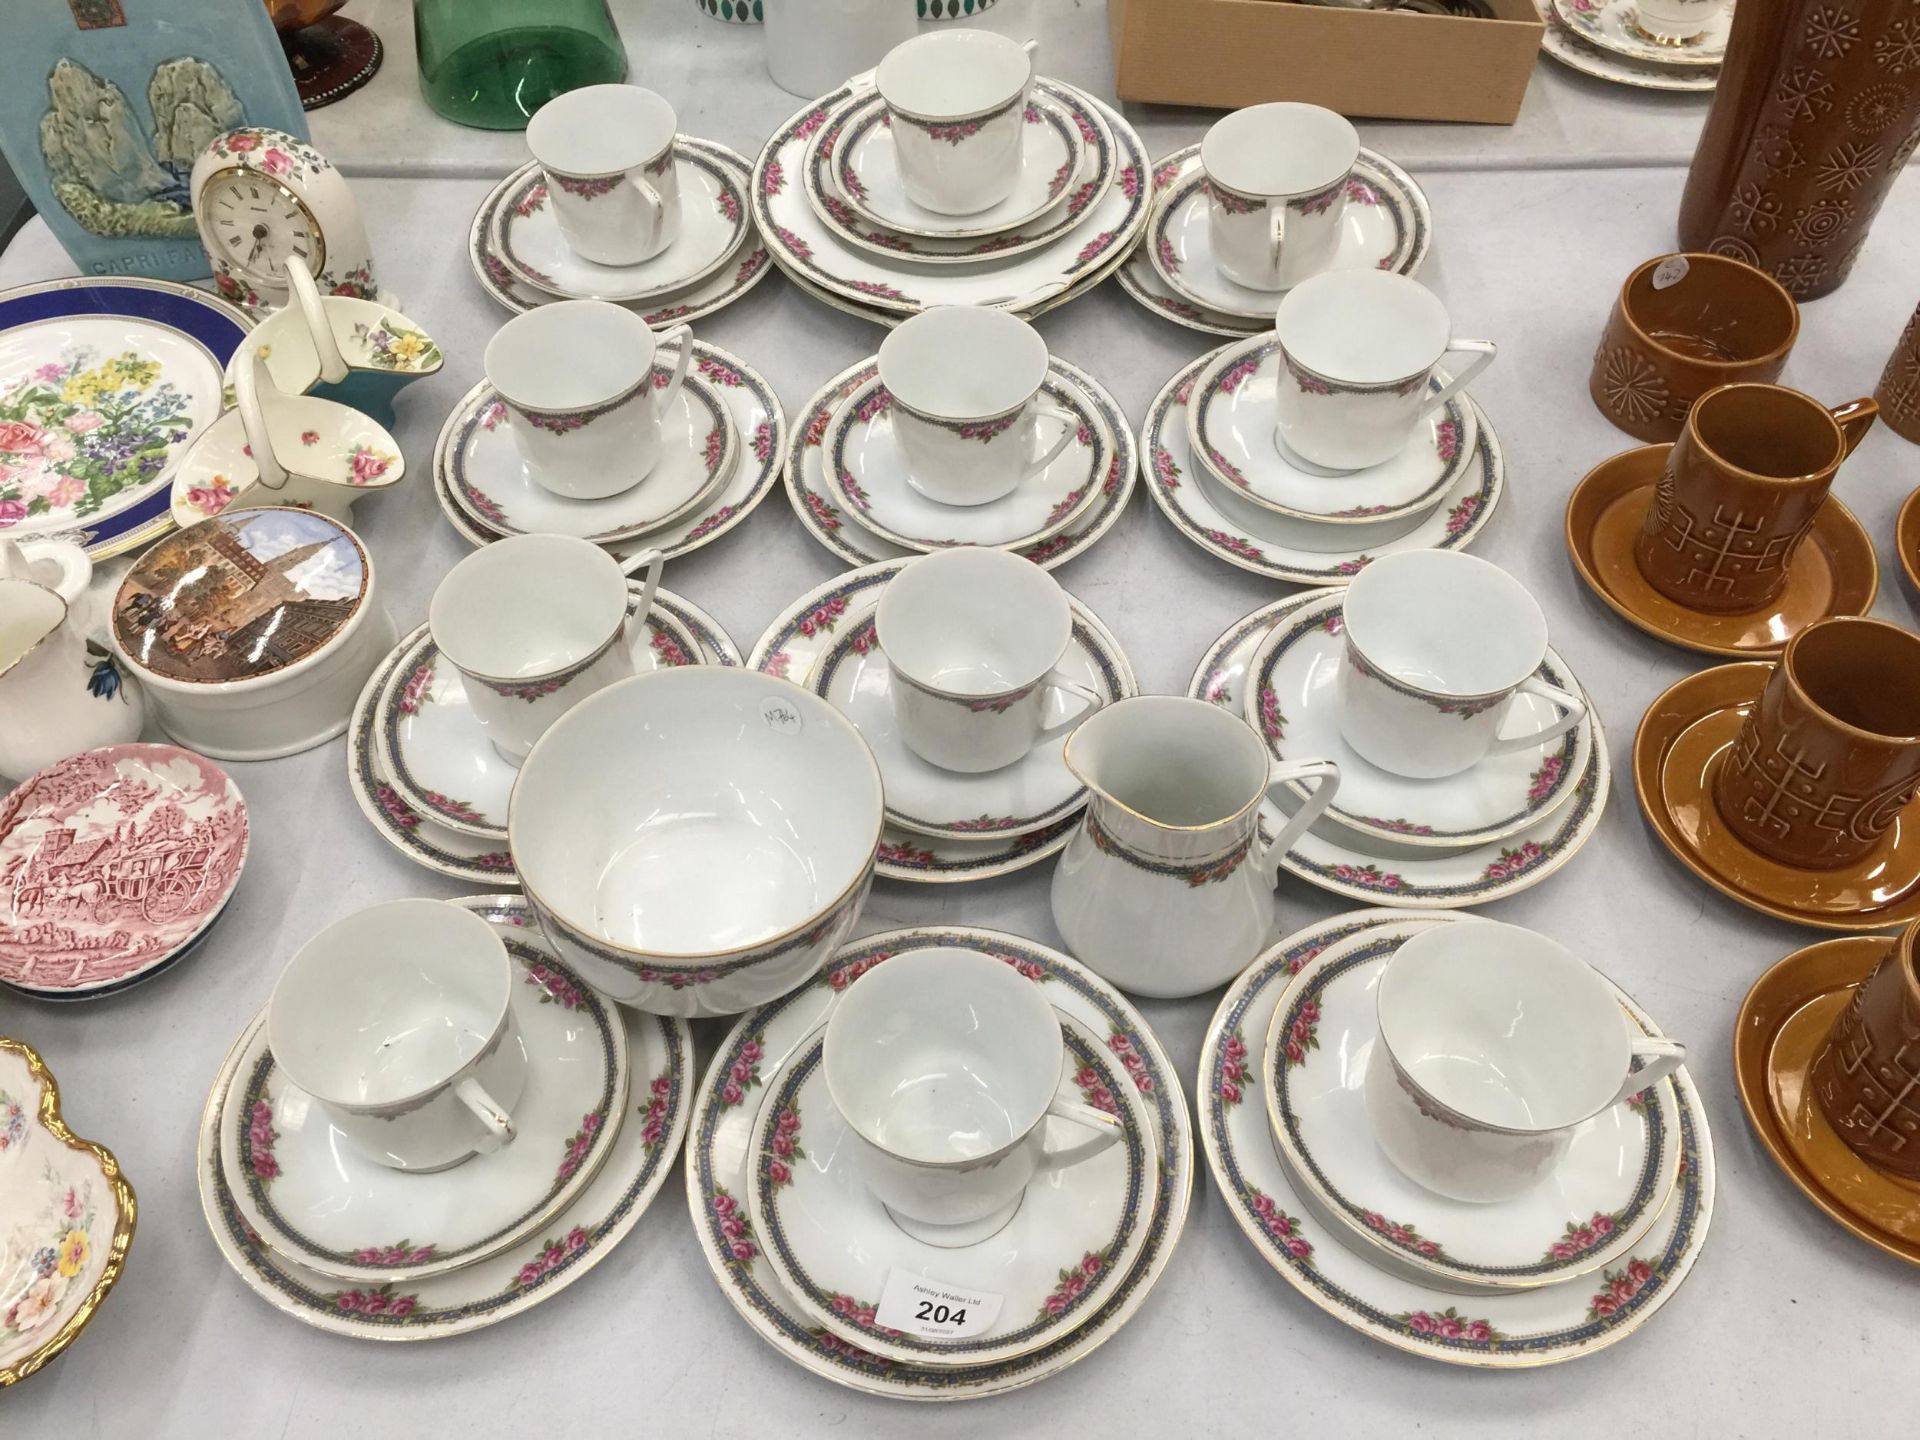 A LARGE QUANTITY OF TEAWARE TO INCLUDE CUPS, SAUCERS, PLATES, CREAM JUG AND SUGAR BOWL